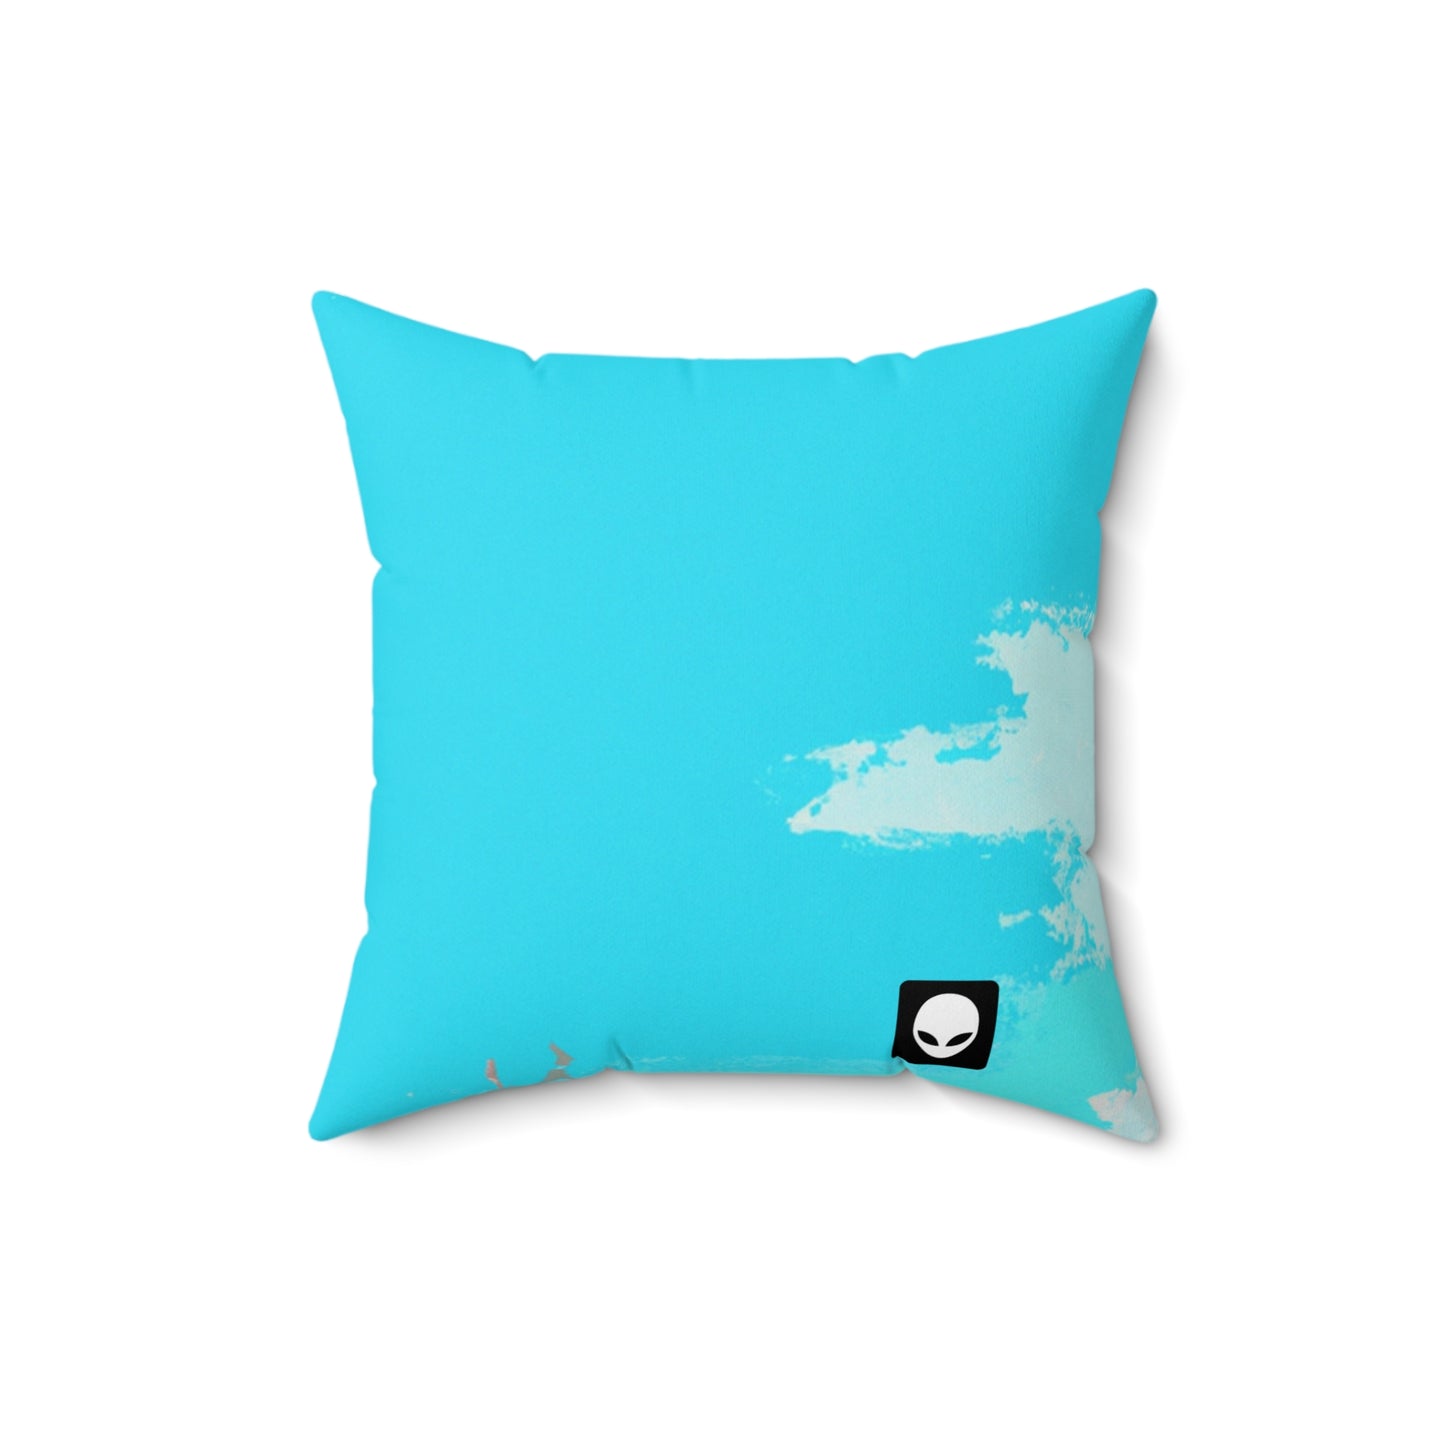 "A Breezy Skyscape: A Combination of Tradition and Modernity" - The Alien Square Pillow